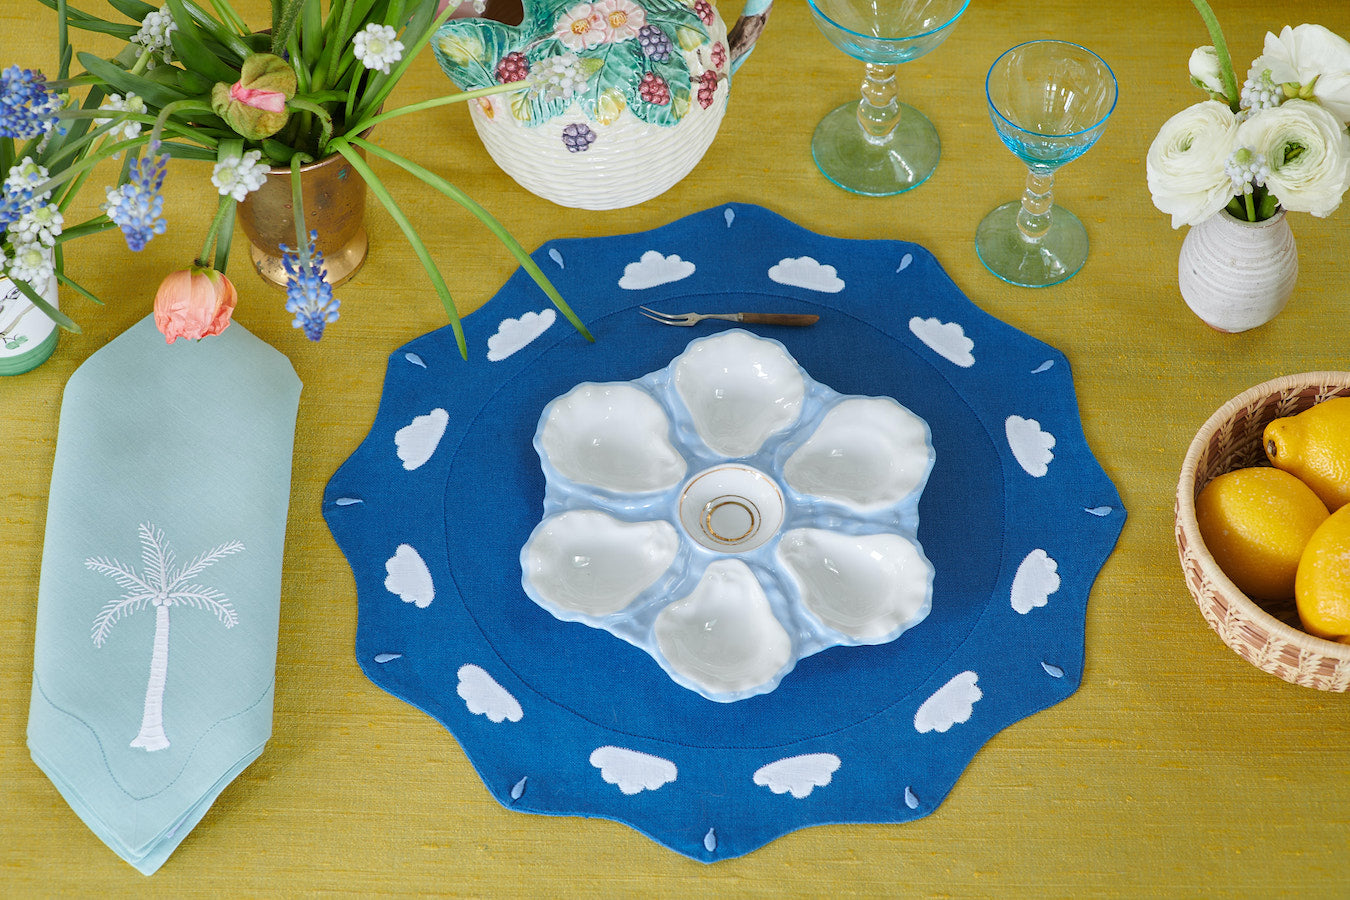 Sicily Scallop Placemats, Royal Blue and White, Set of 2